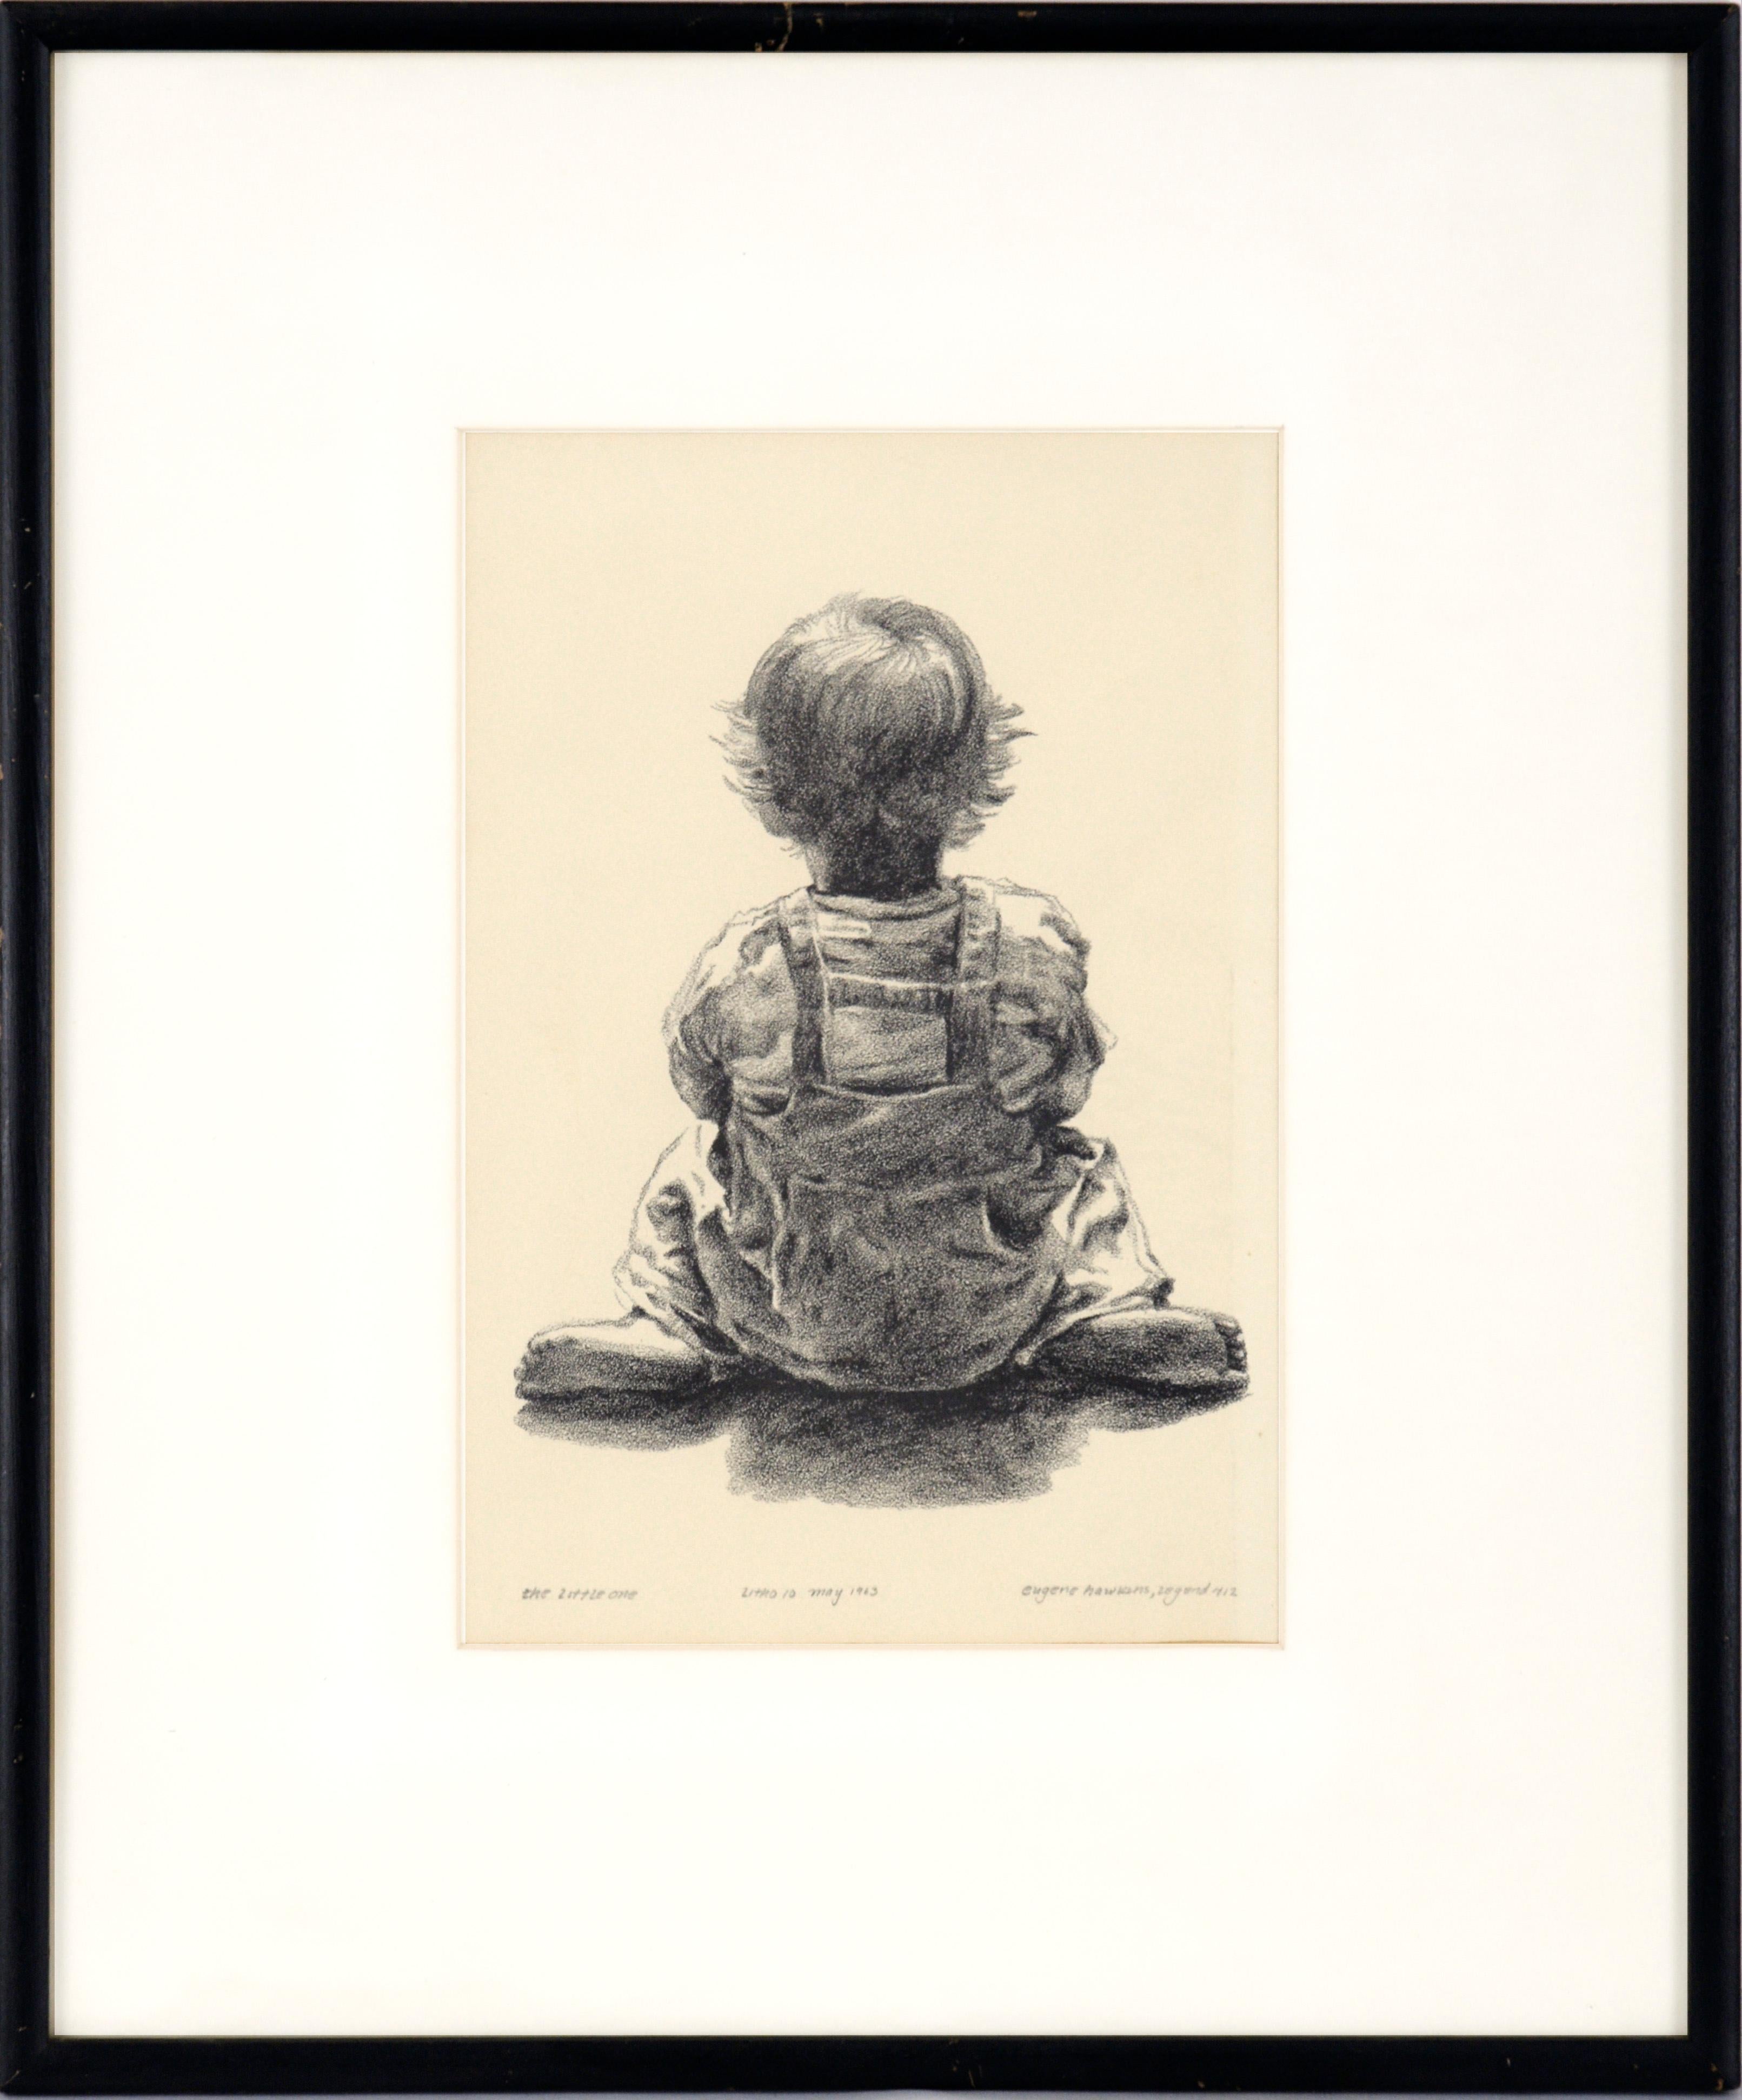 "The Little One" - Rare Signed Figurative Lithograph in Ink on Paper